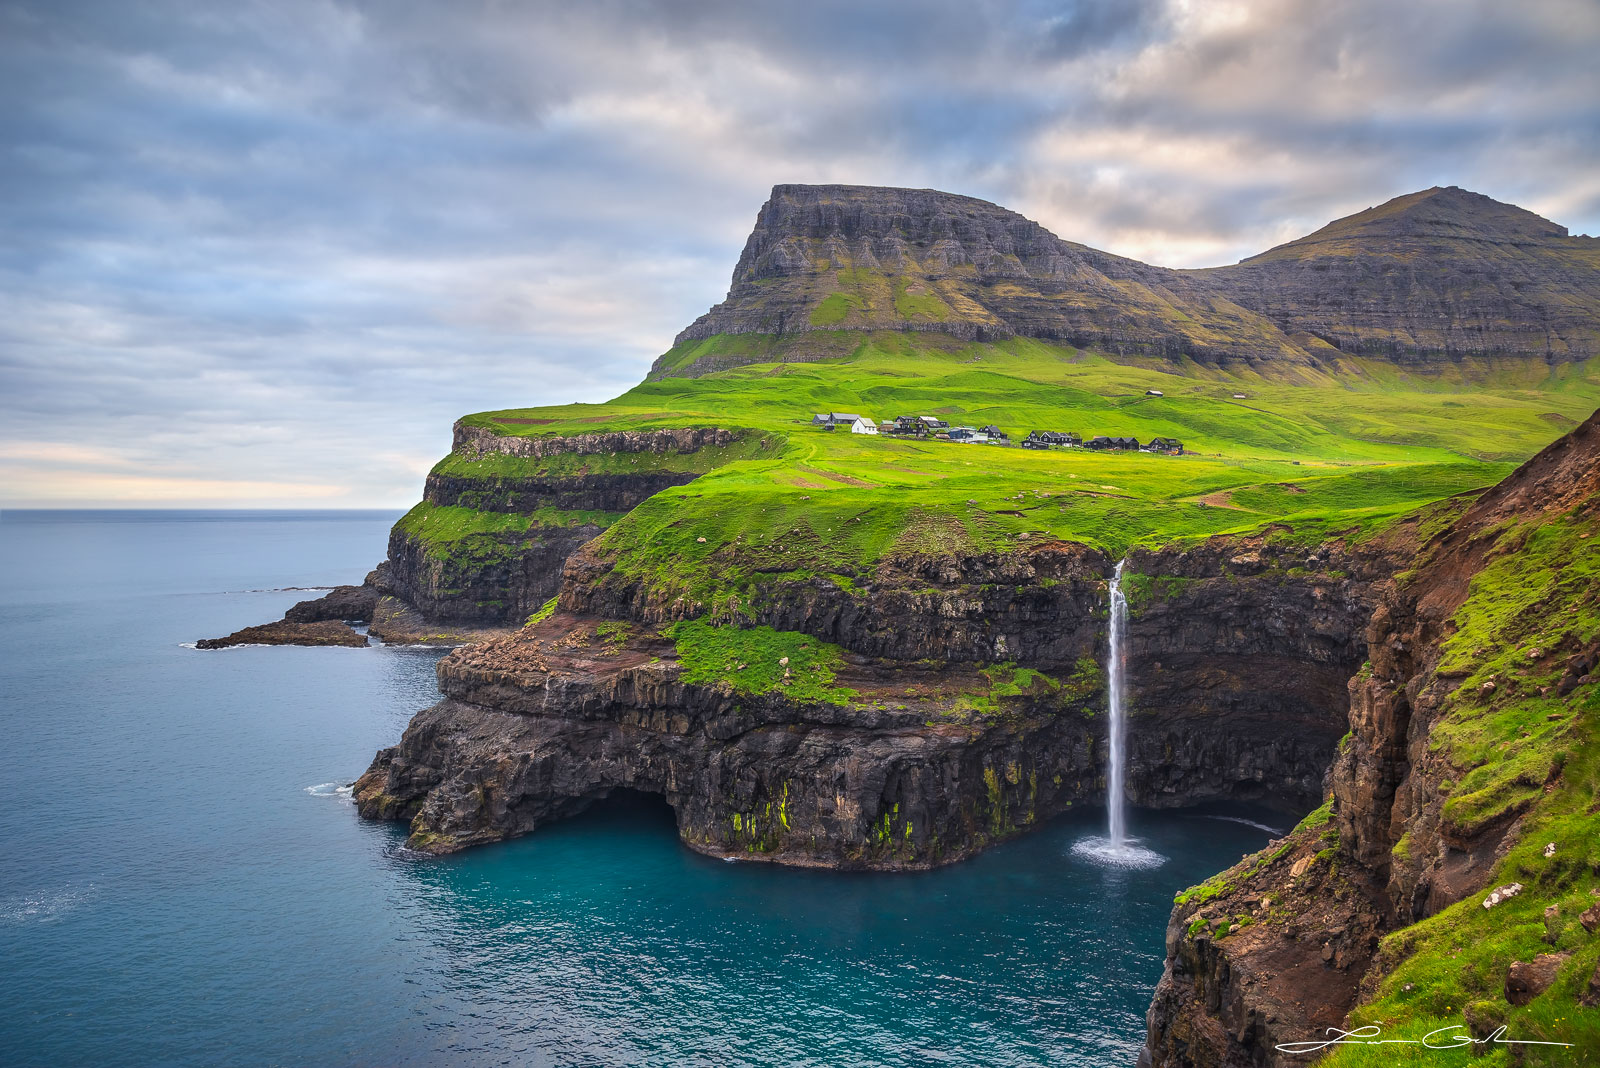 A beautiful waterfall flowing into the ocean from a green lush valley surrounded by mountains - Faroe Islands - Gintchin Fine Art